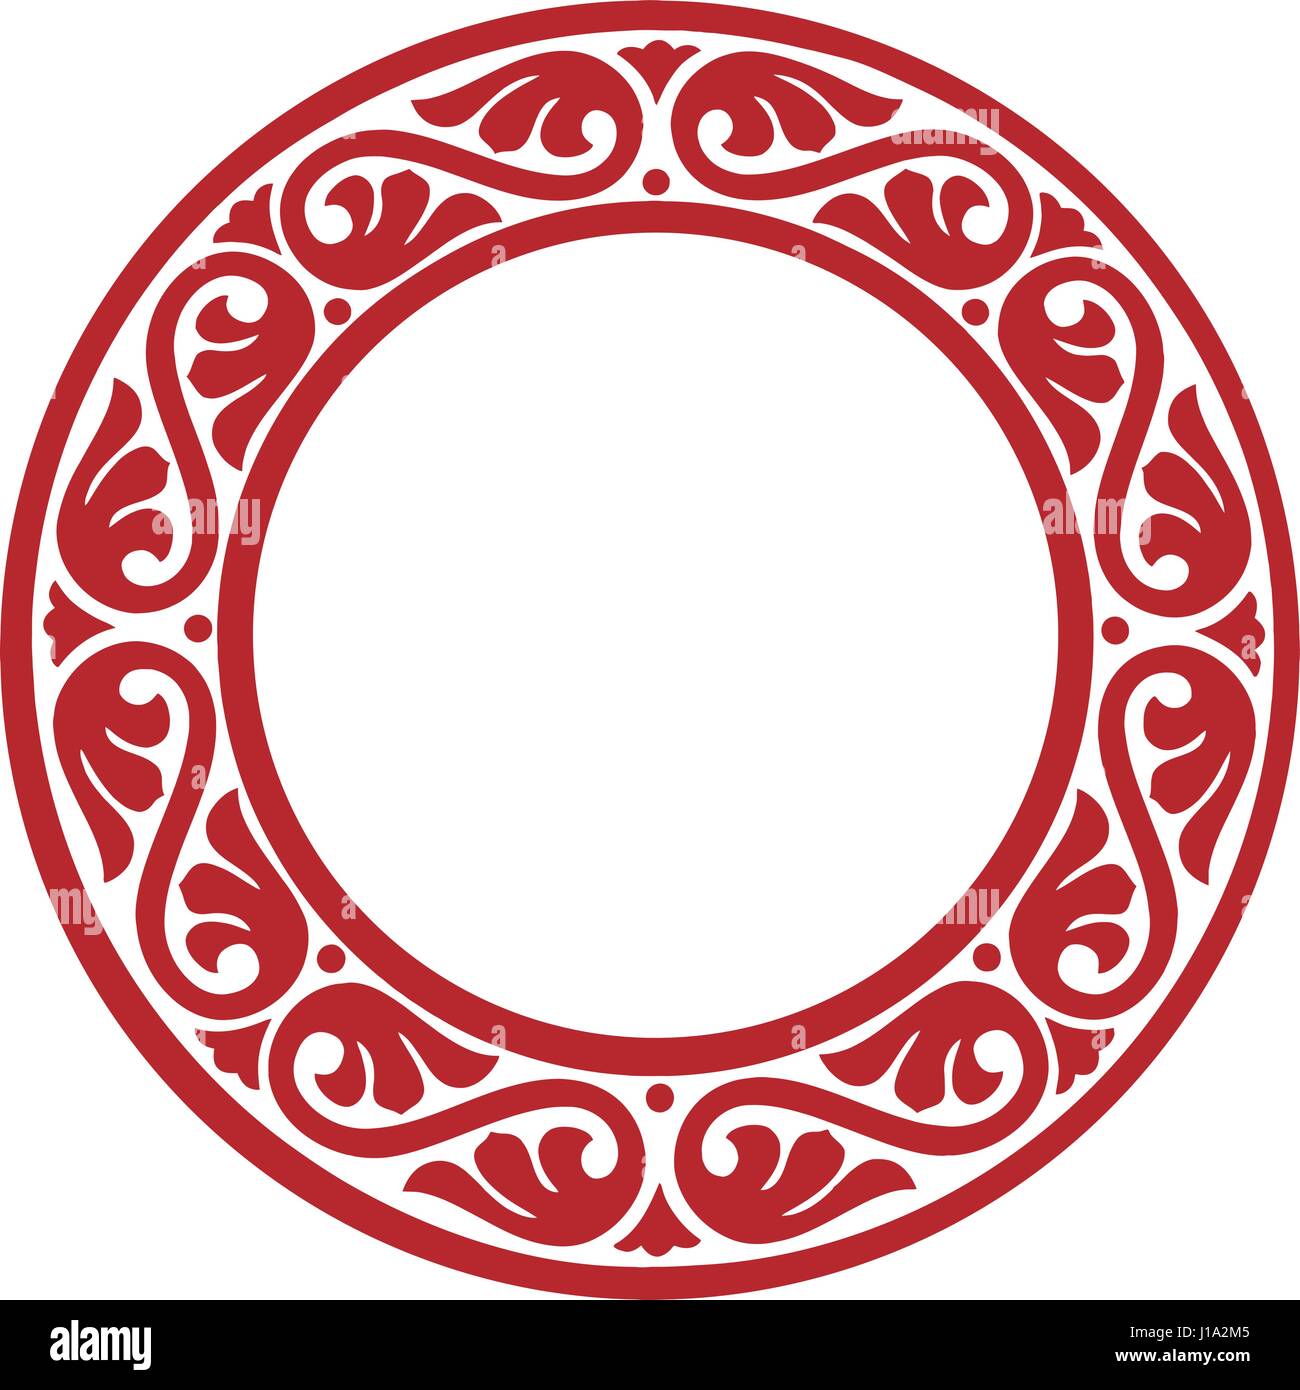 East-European traditional decorative circle framework with abstract flowers Stock Vector